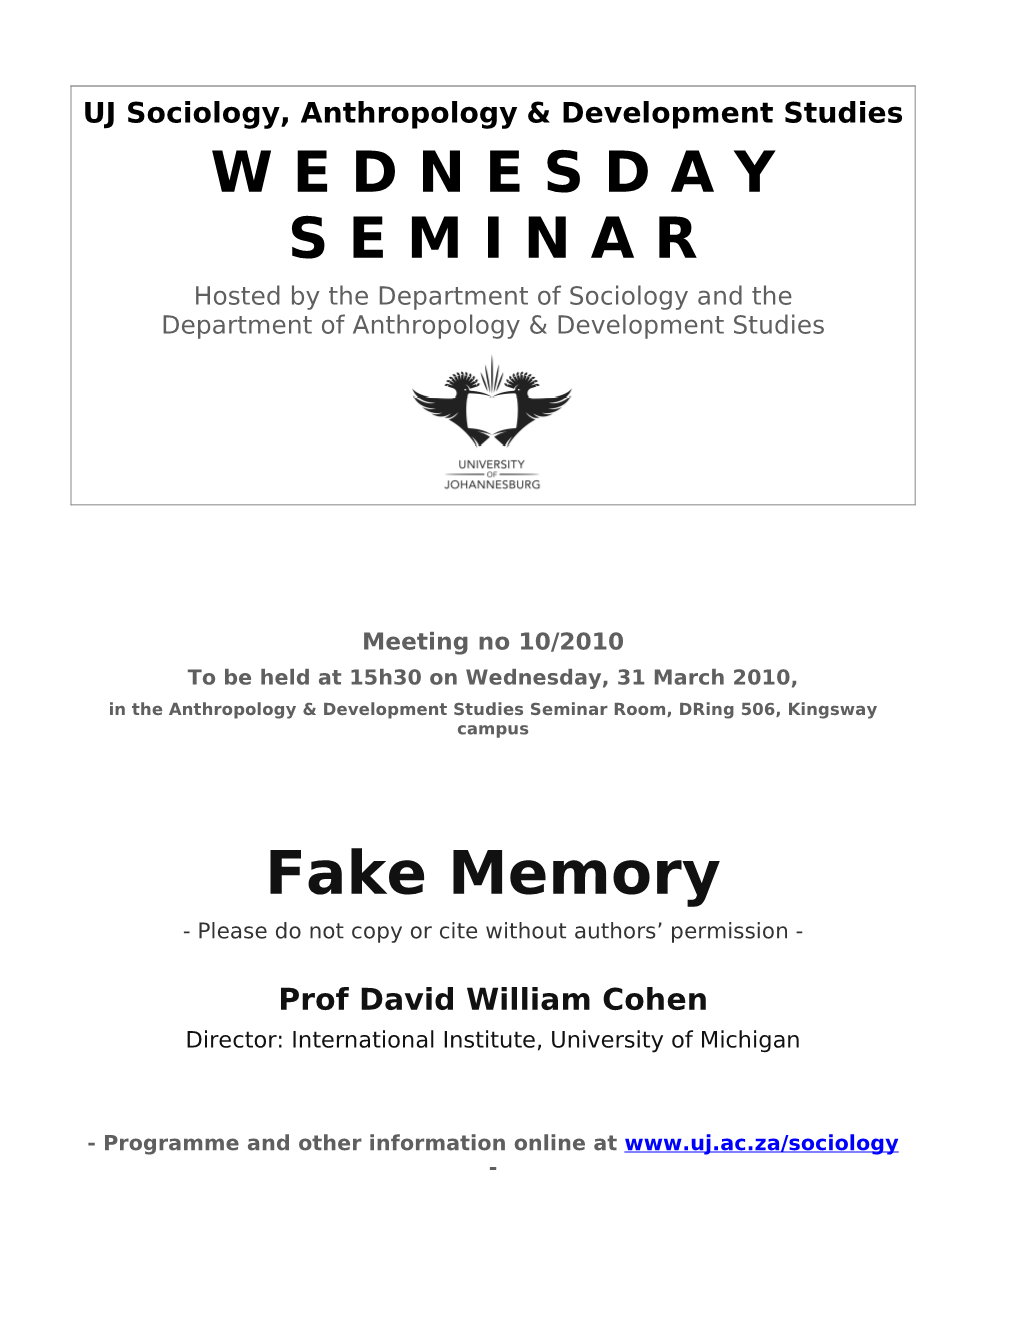 Fake Memory - Please Do Not Copy Or Cite Without Authors’ Permission